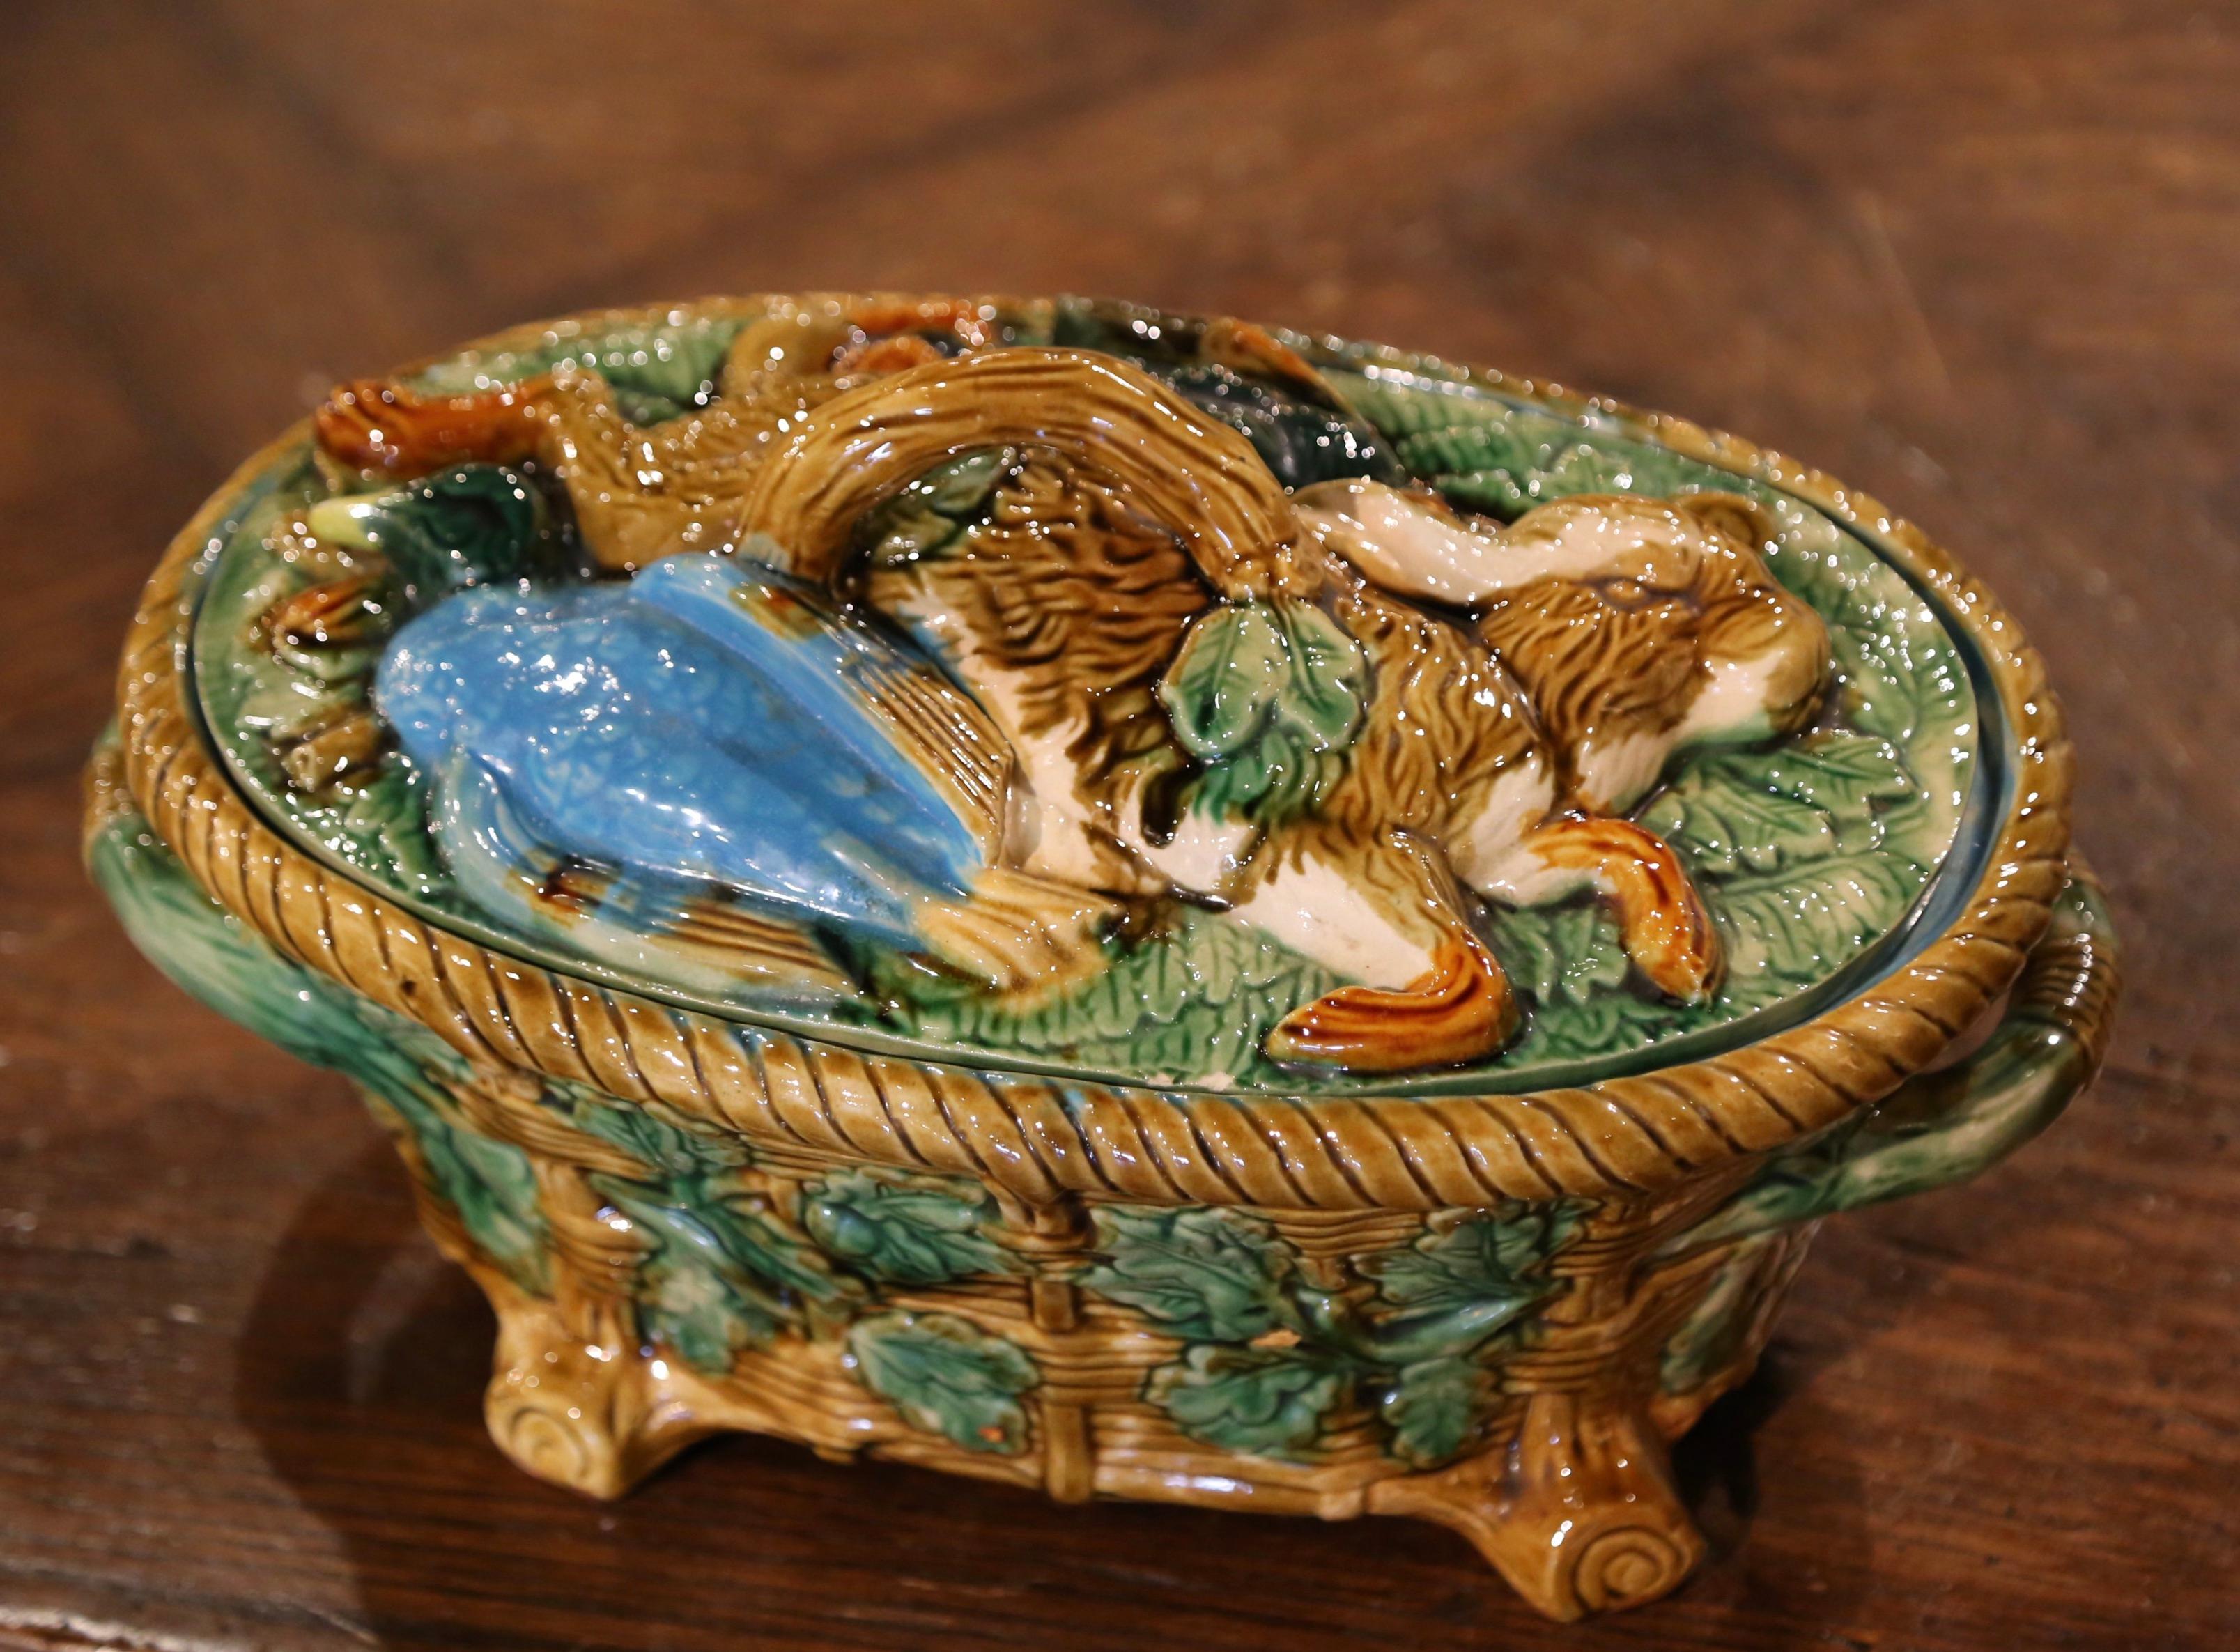 Vintage English Hand-Painted Minton Style Majolica Game Pie Tureen with Lid In Excellent Condition For Sale In Dallas, TX